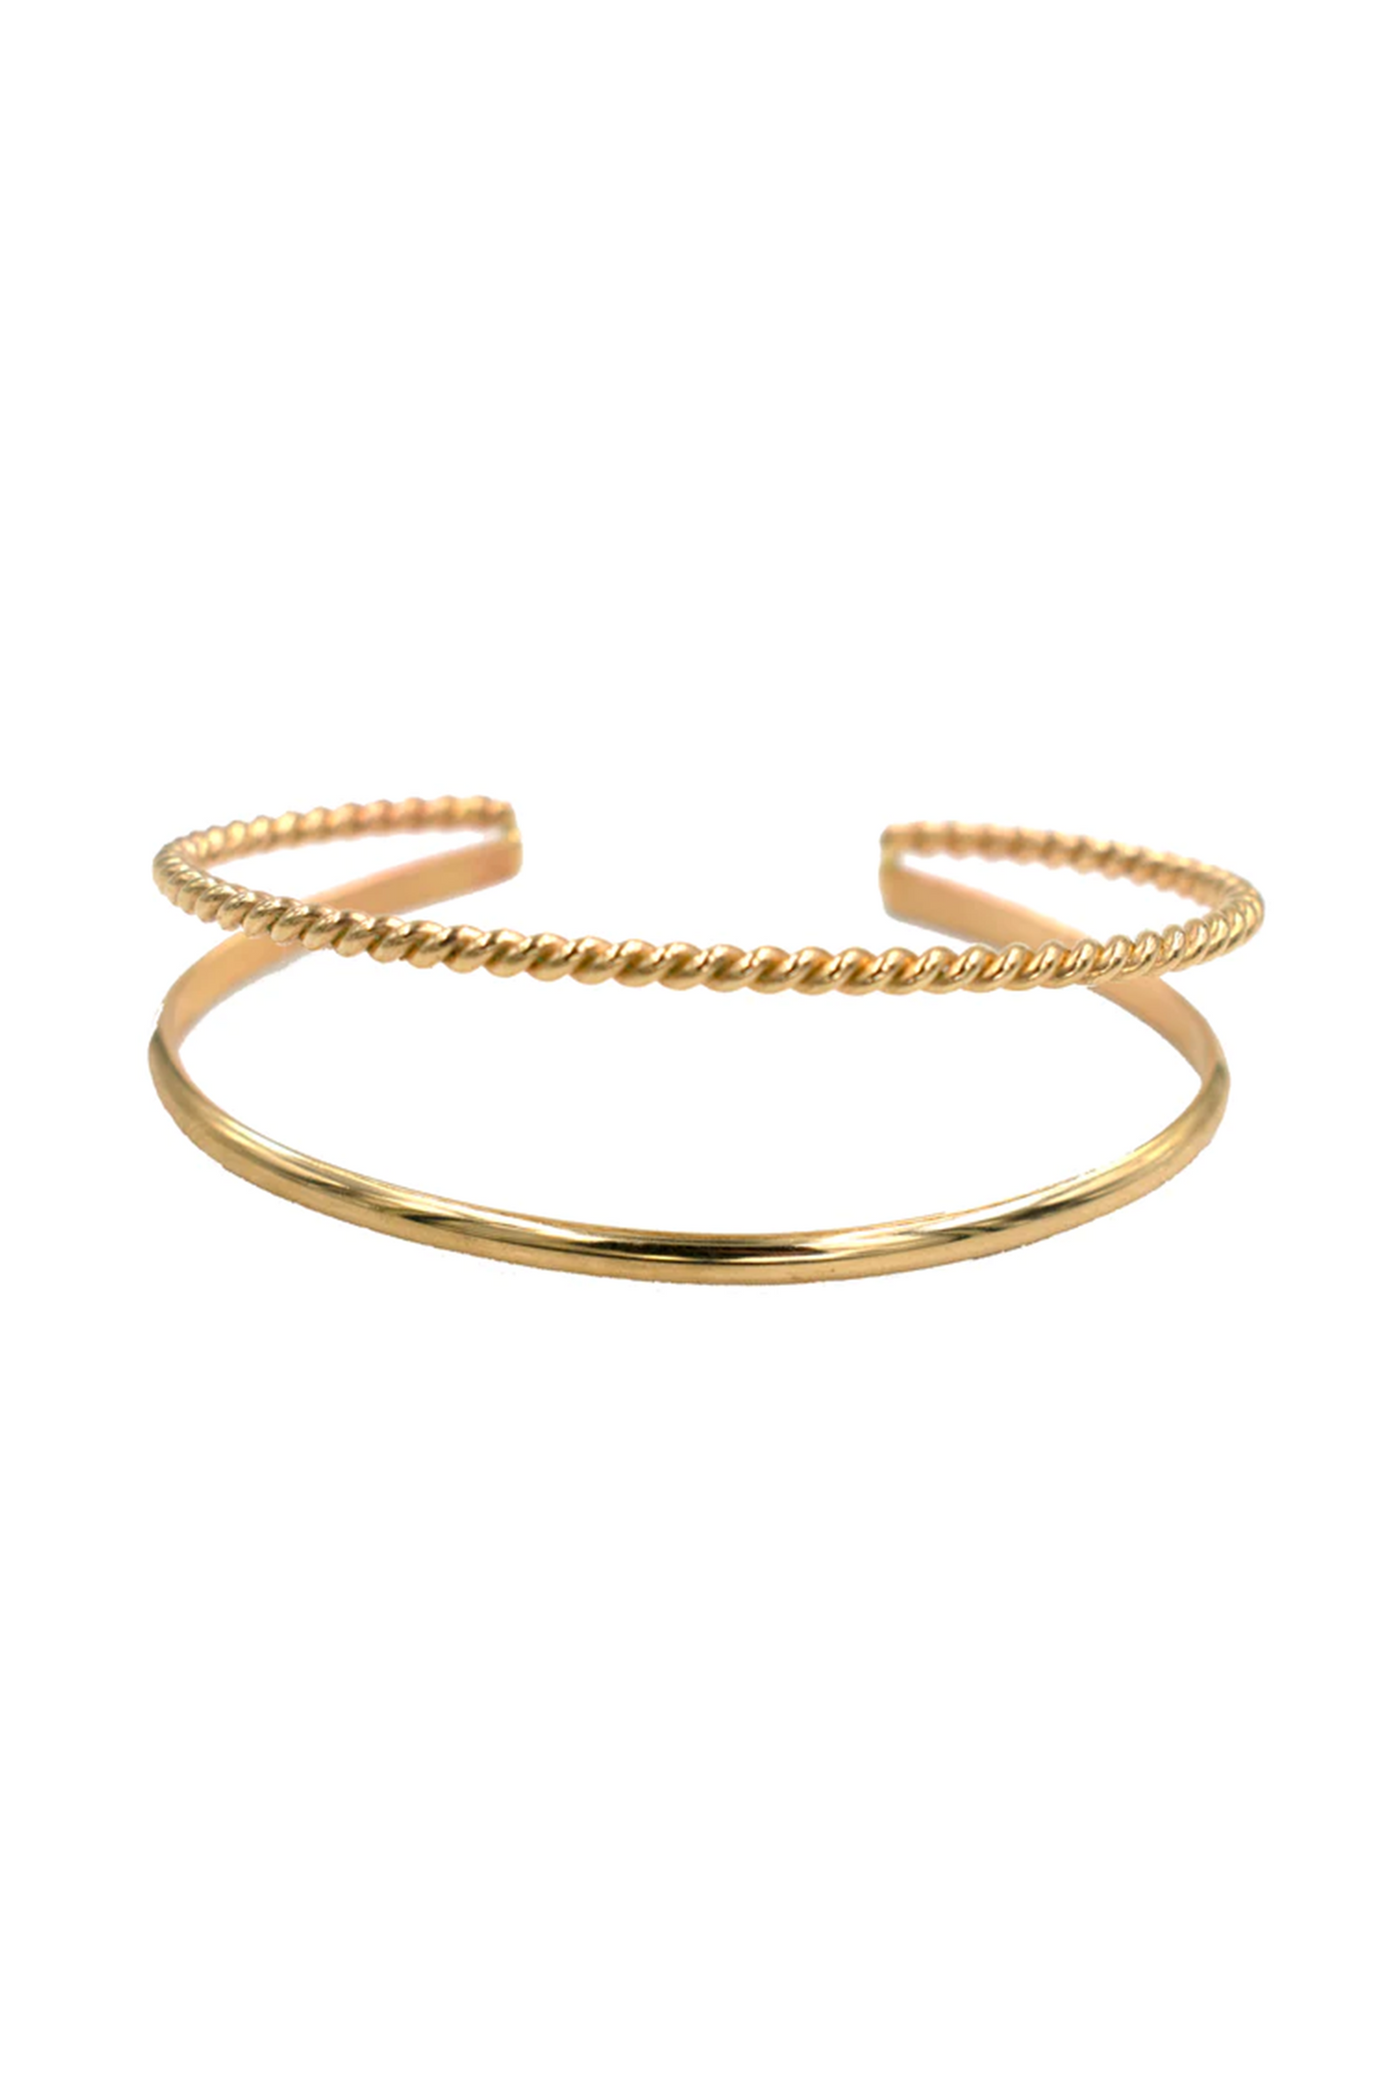 Paradigm Designs: Gold Filled Rope Sync Cuff